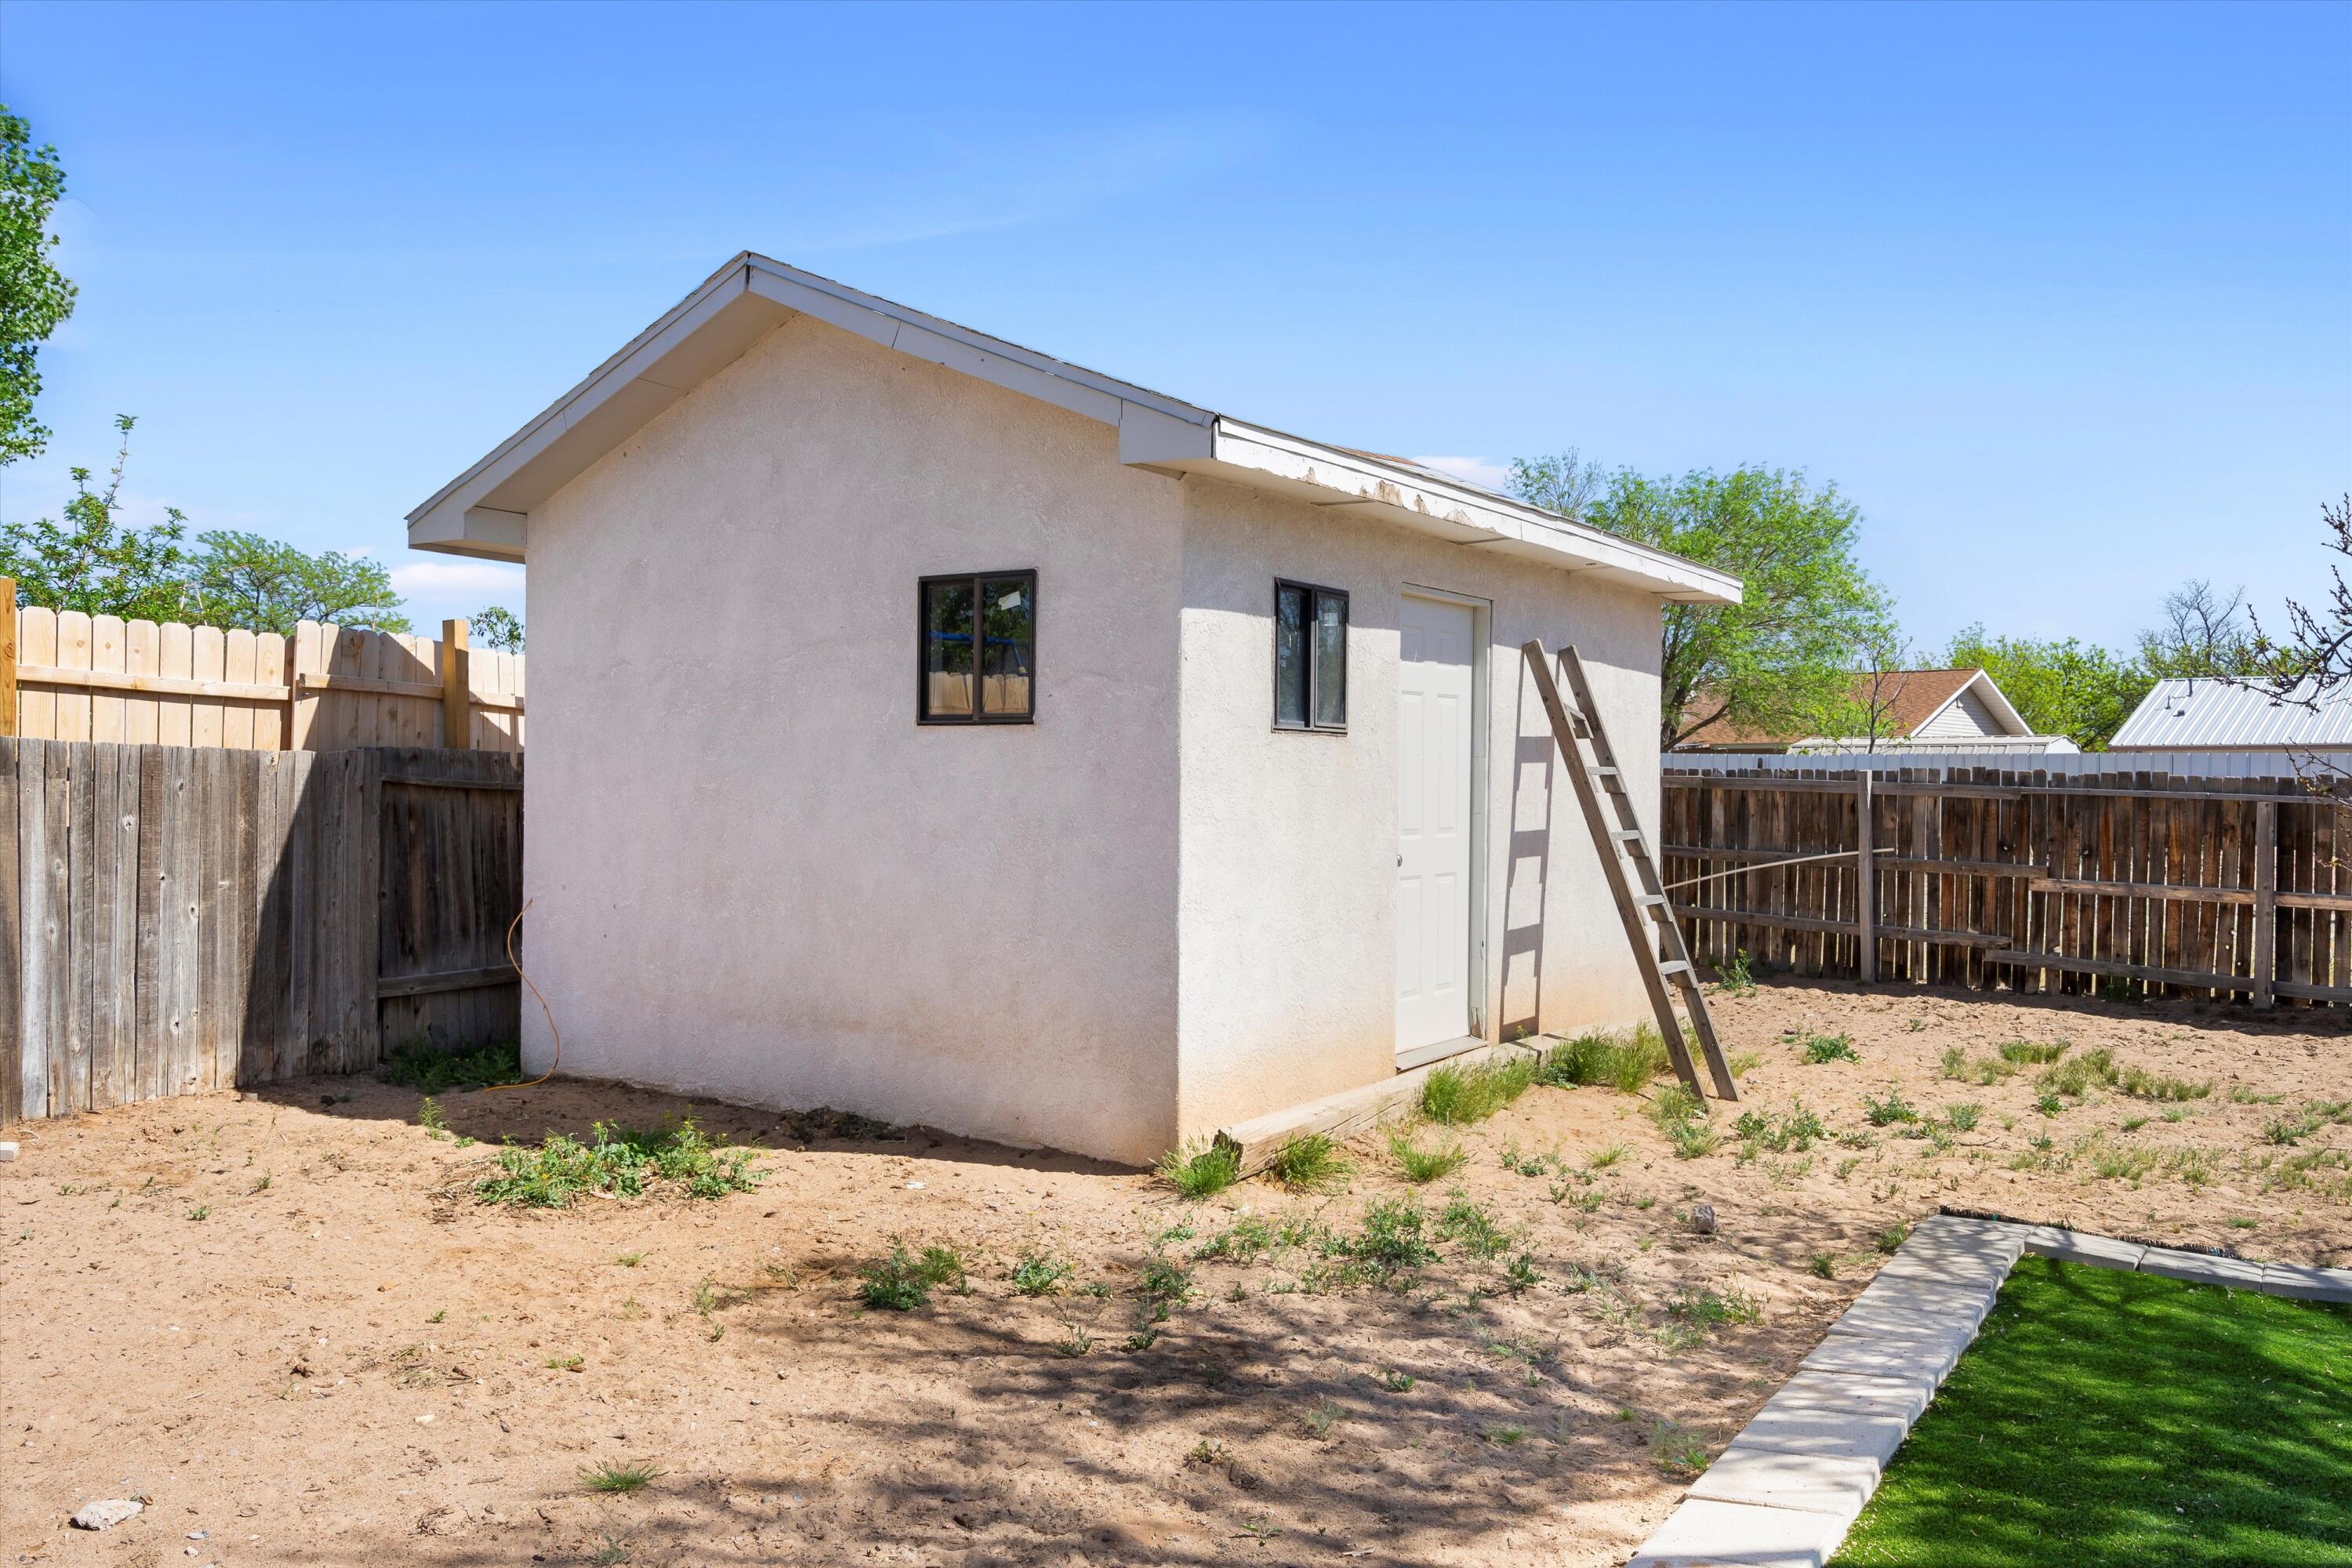 6304 Pastorcito Drive NW, Albuquerque, New Mexico 87120, 3 Bedrooms Bedrooms, ,2 BathroomsBathrooms,Residential,For Sale,6304 Pastorcito Drive NW,1061295